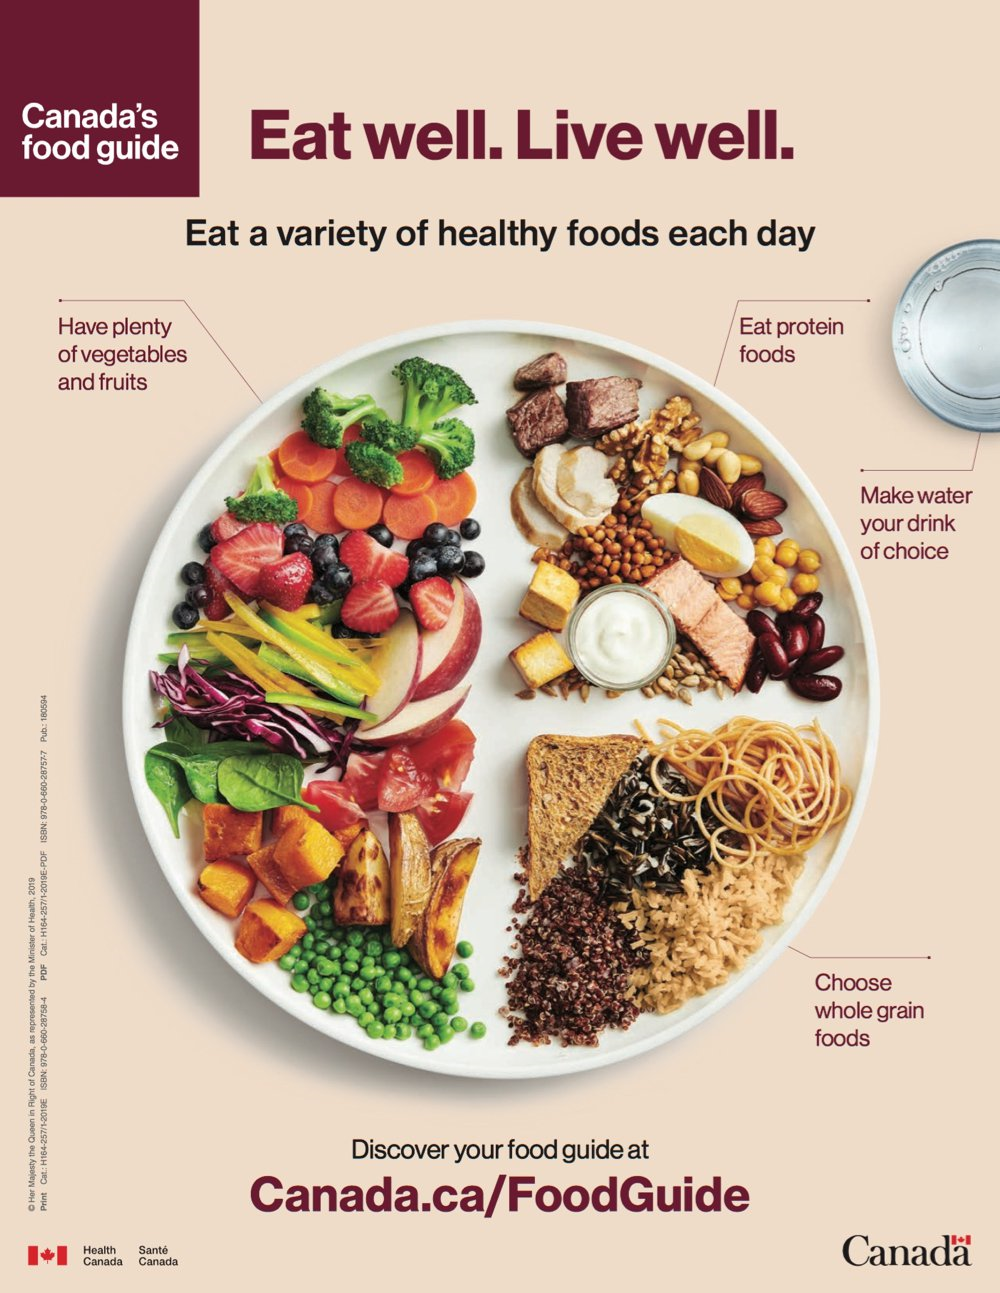 CMA’s advocacy work on new Canada’s Food Guide pays off | CMA